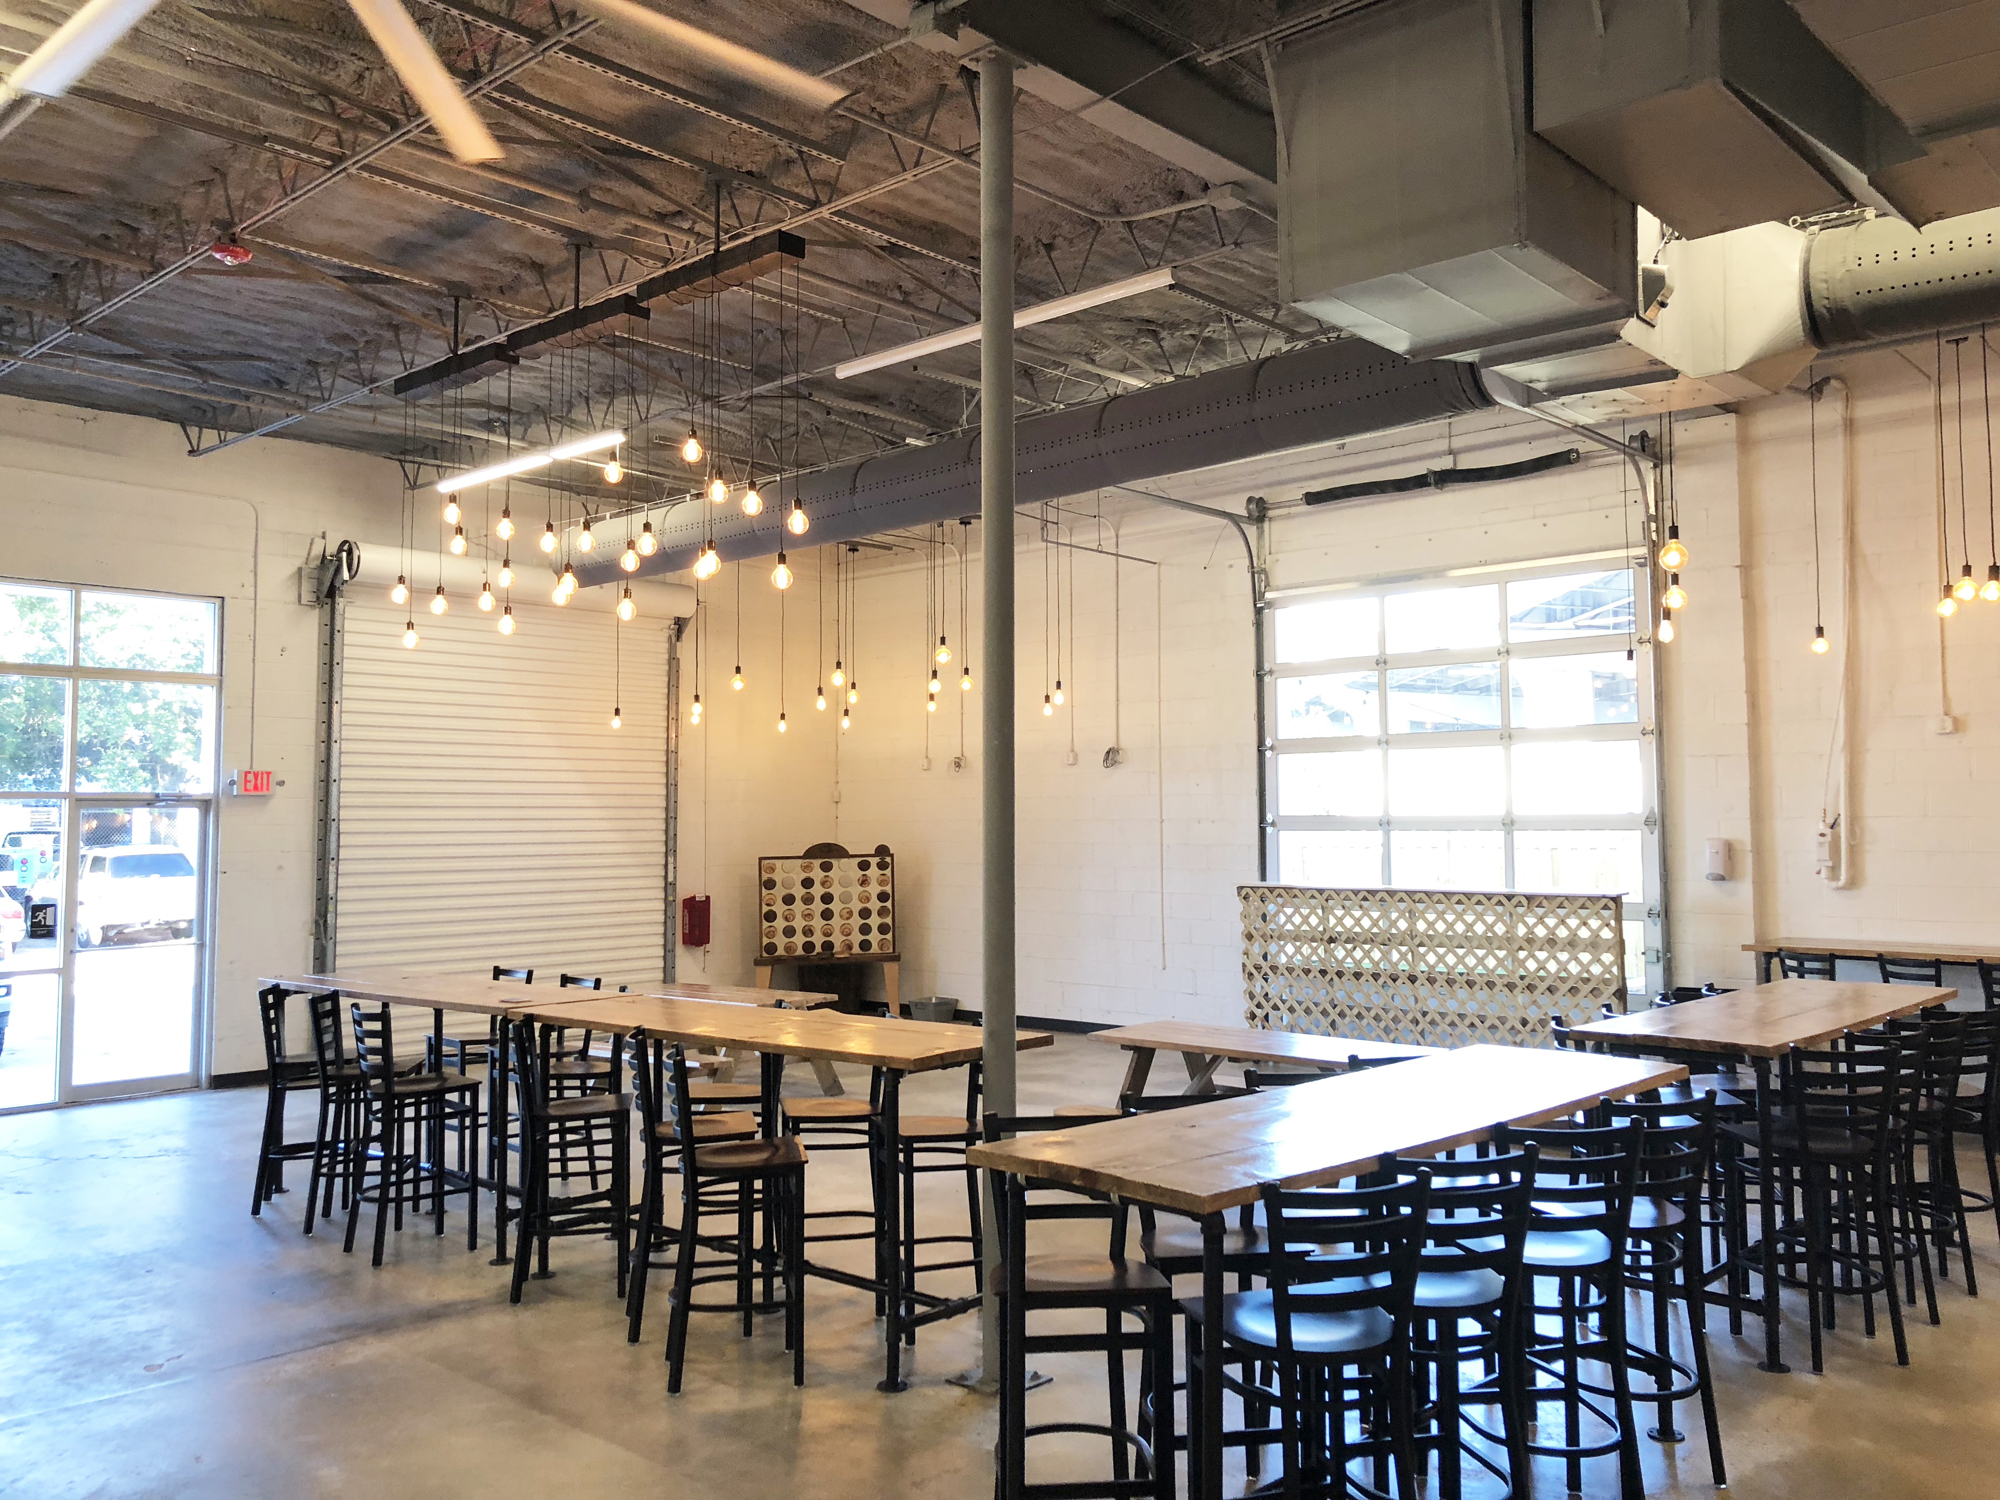 The taproom area of Kanine Social will be open until 10 p.m. daily.